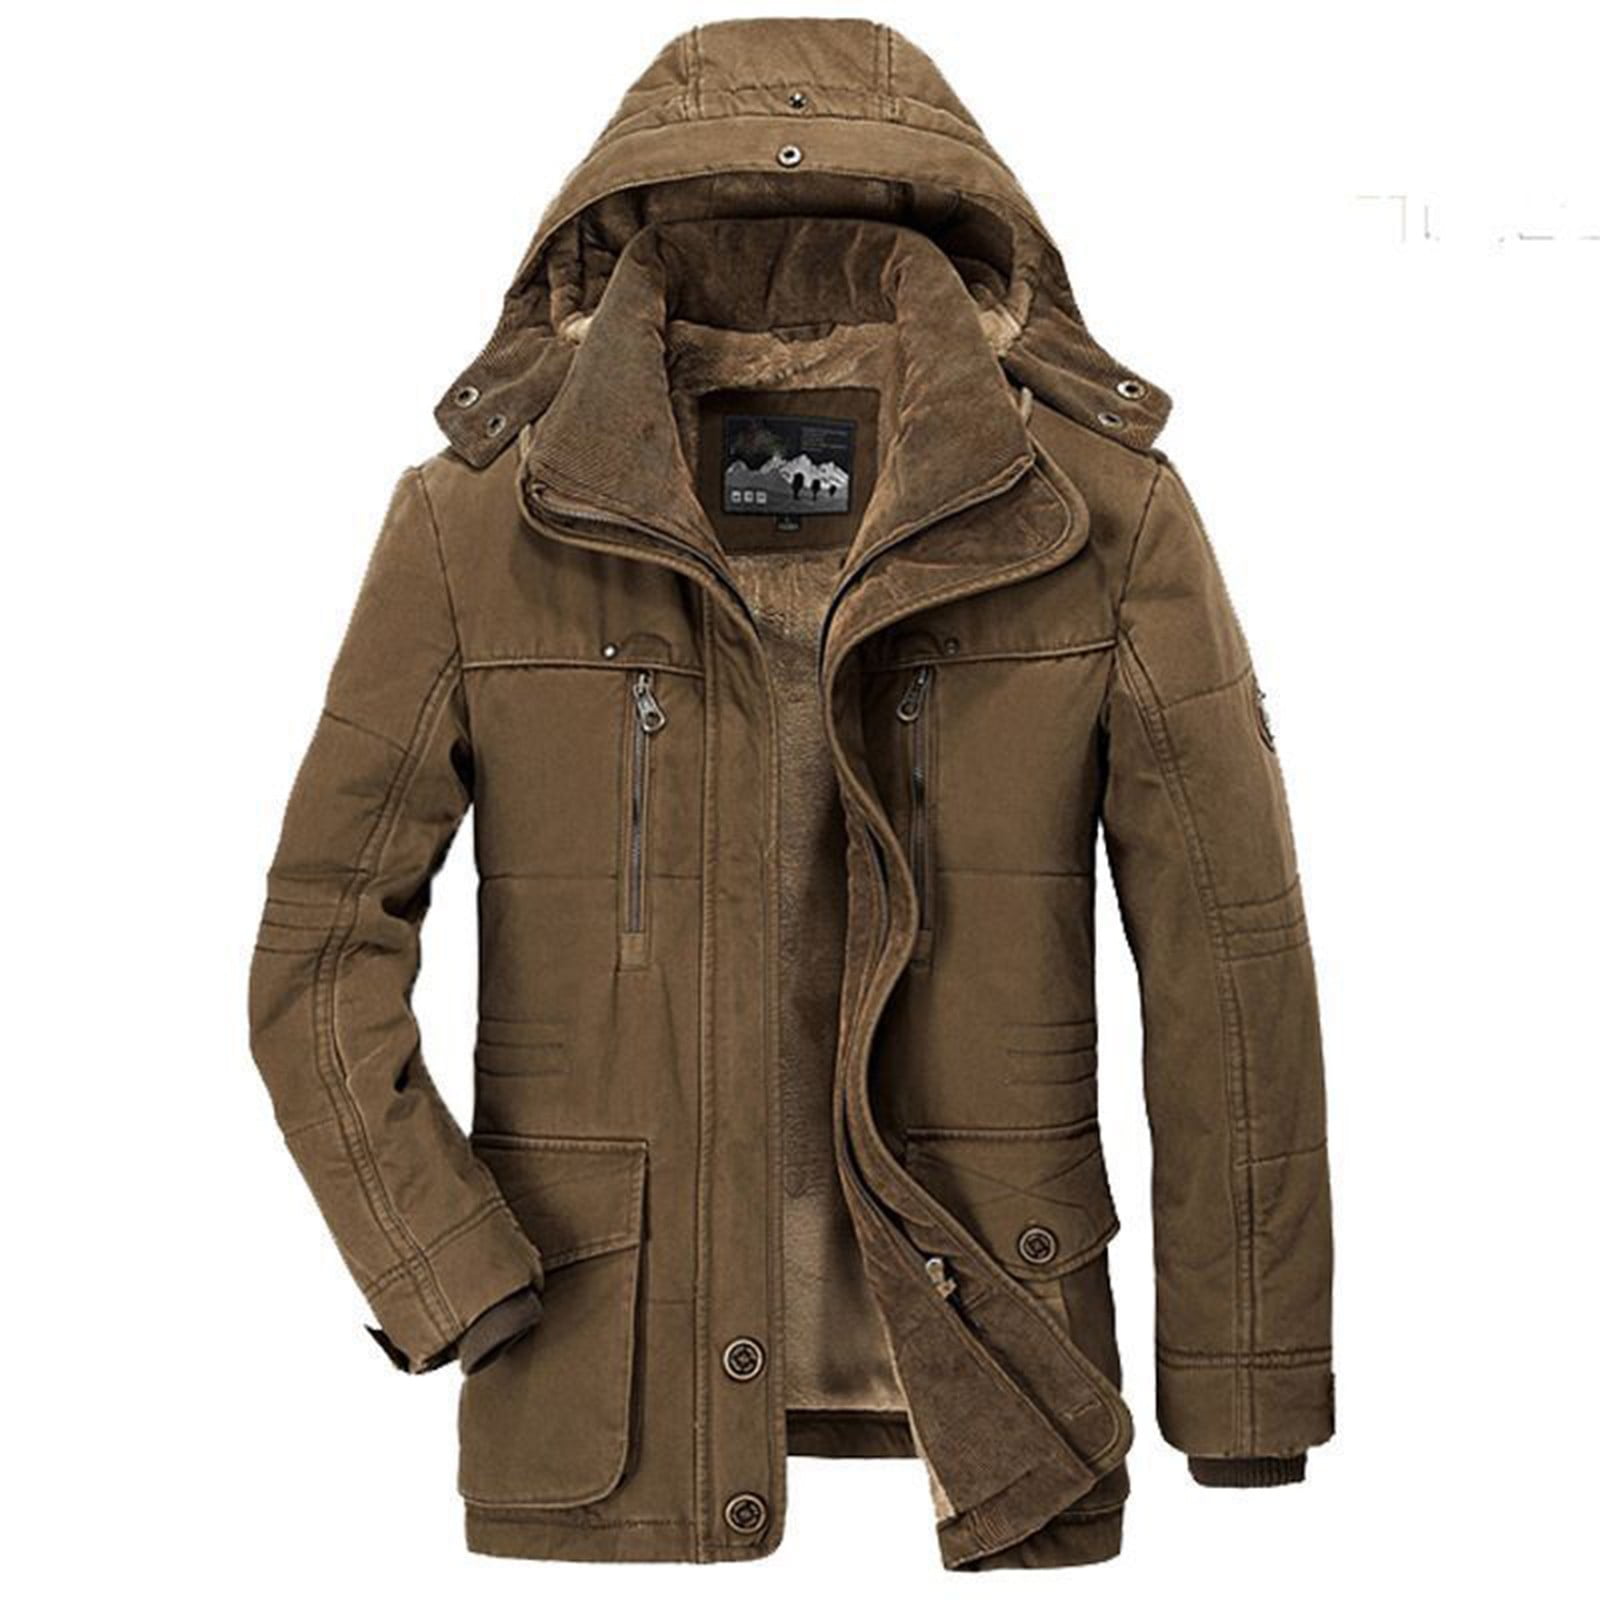 TQWQT Men's Winter Warm Parka Jacket Sherpa Lined Cotton Coat with ...